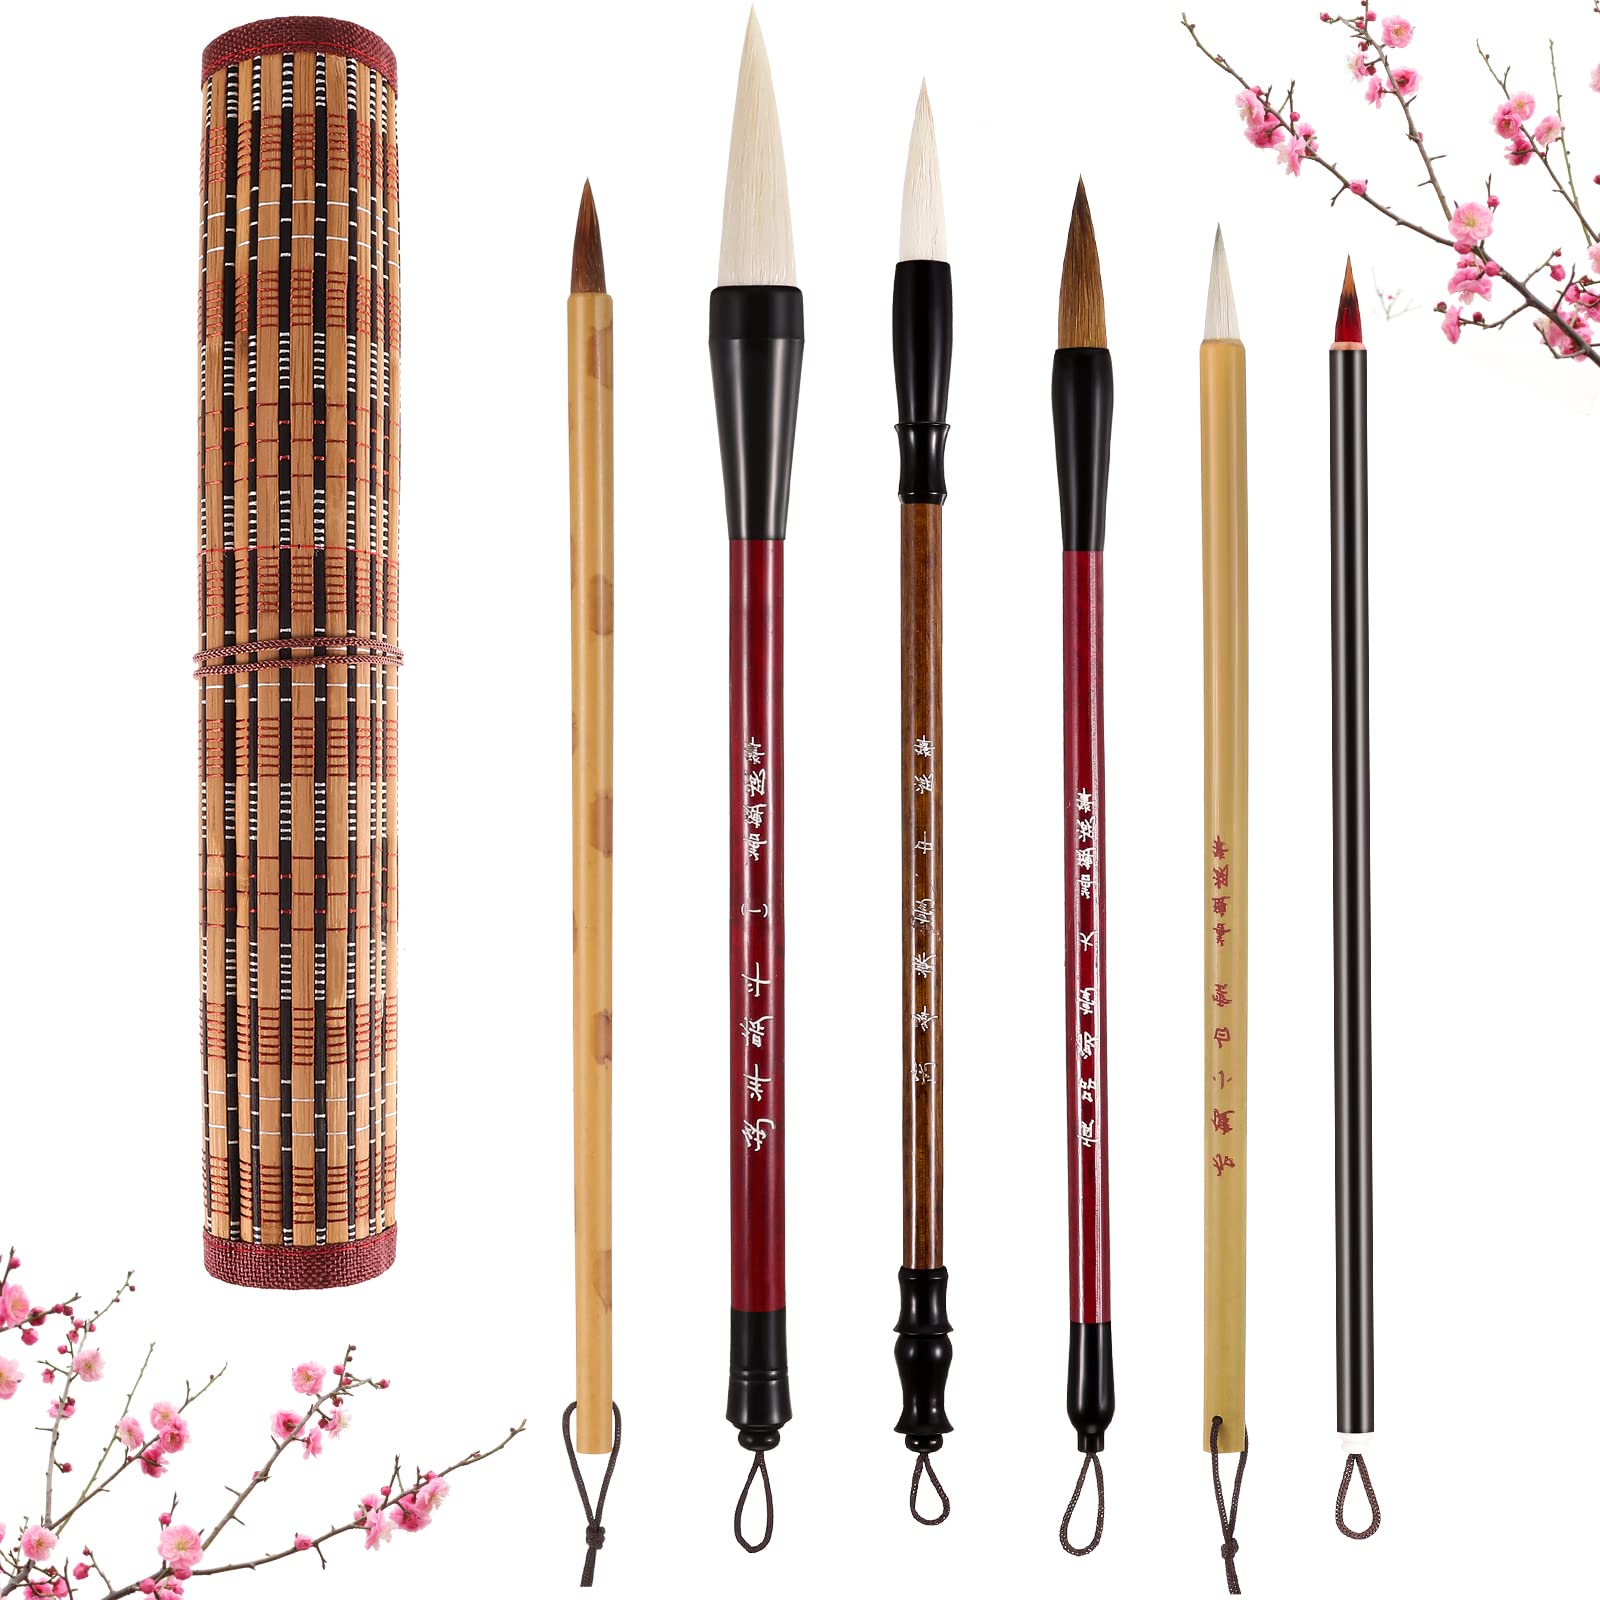 6 Pieces Chinese Calligraphy Brushes Painting Writing Brushes Watercolor  Brushes Set Kanji Japanese Sumi Painting Drawing Brushes Kanji Art Brushes  with Roll-up Brush Holder